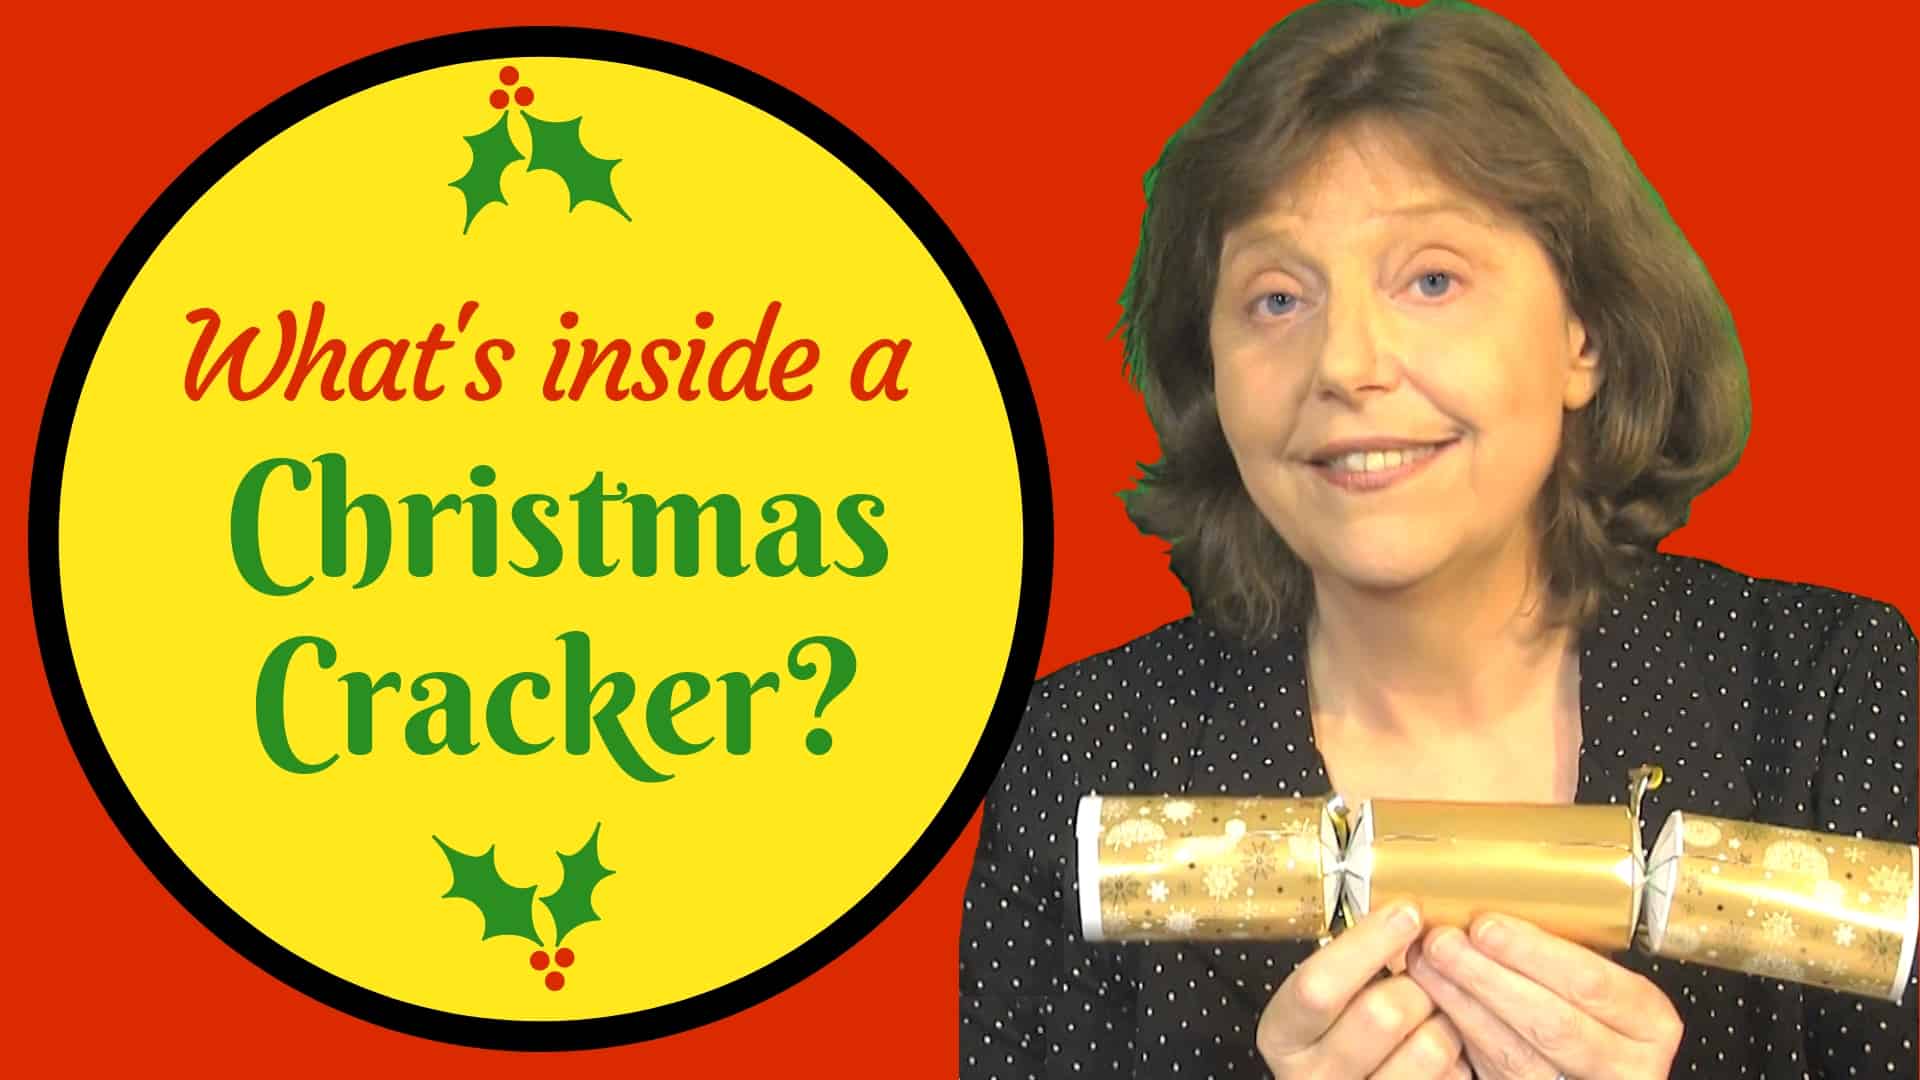 What's inside a Christmas cracker? Let's see!